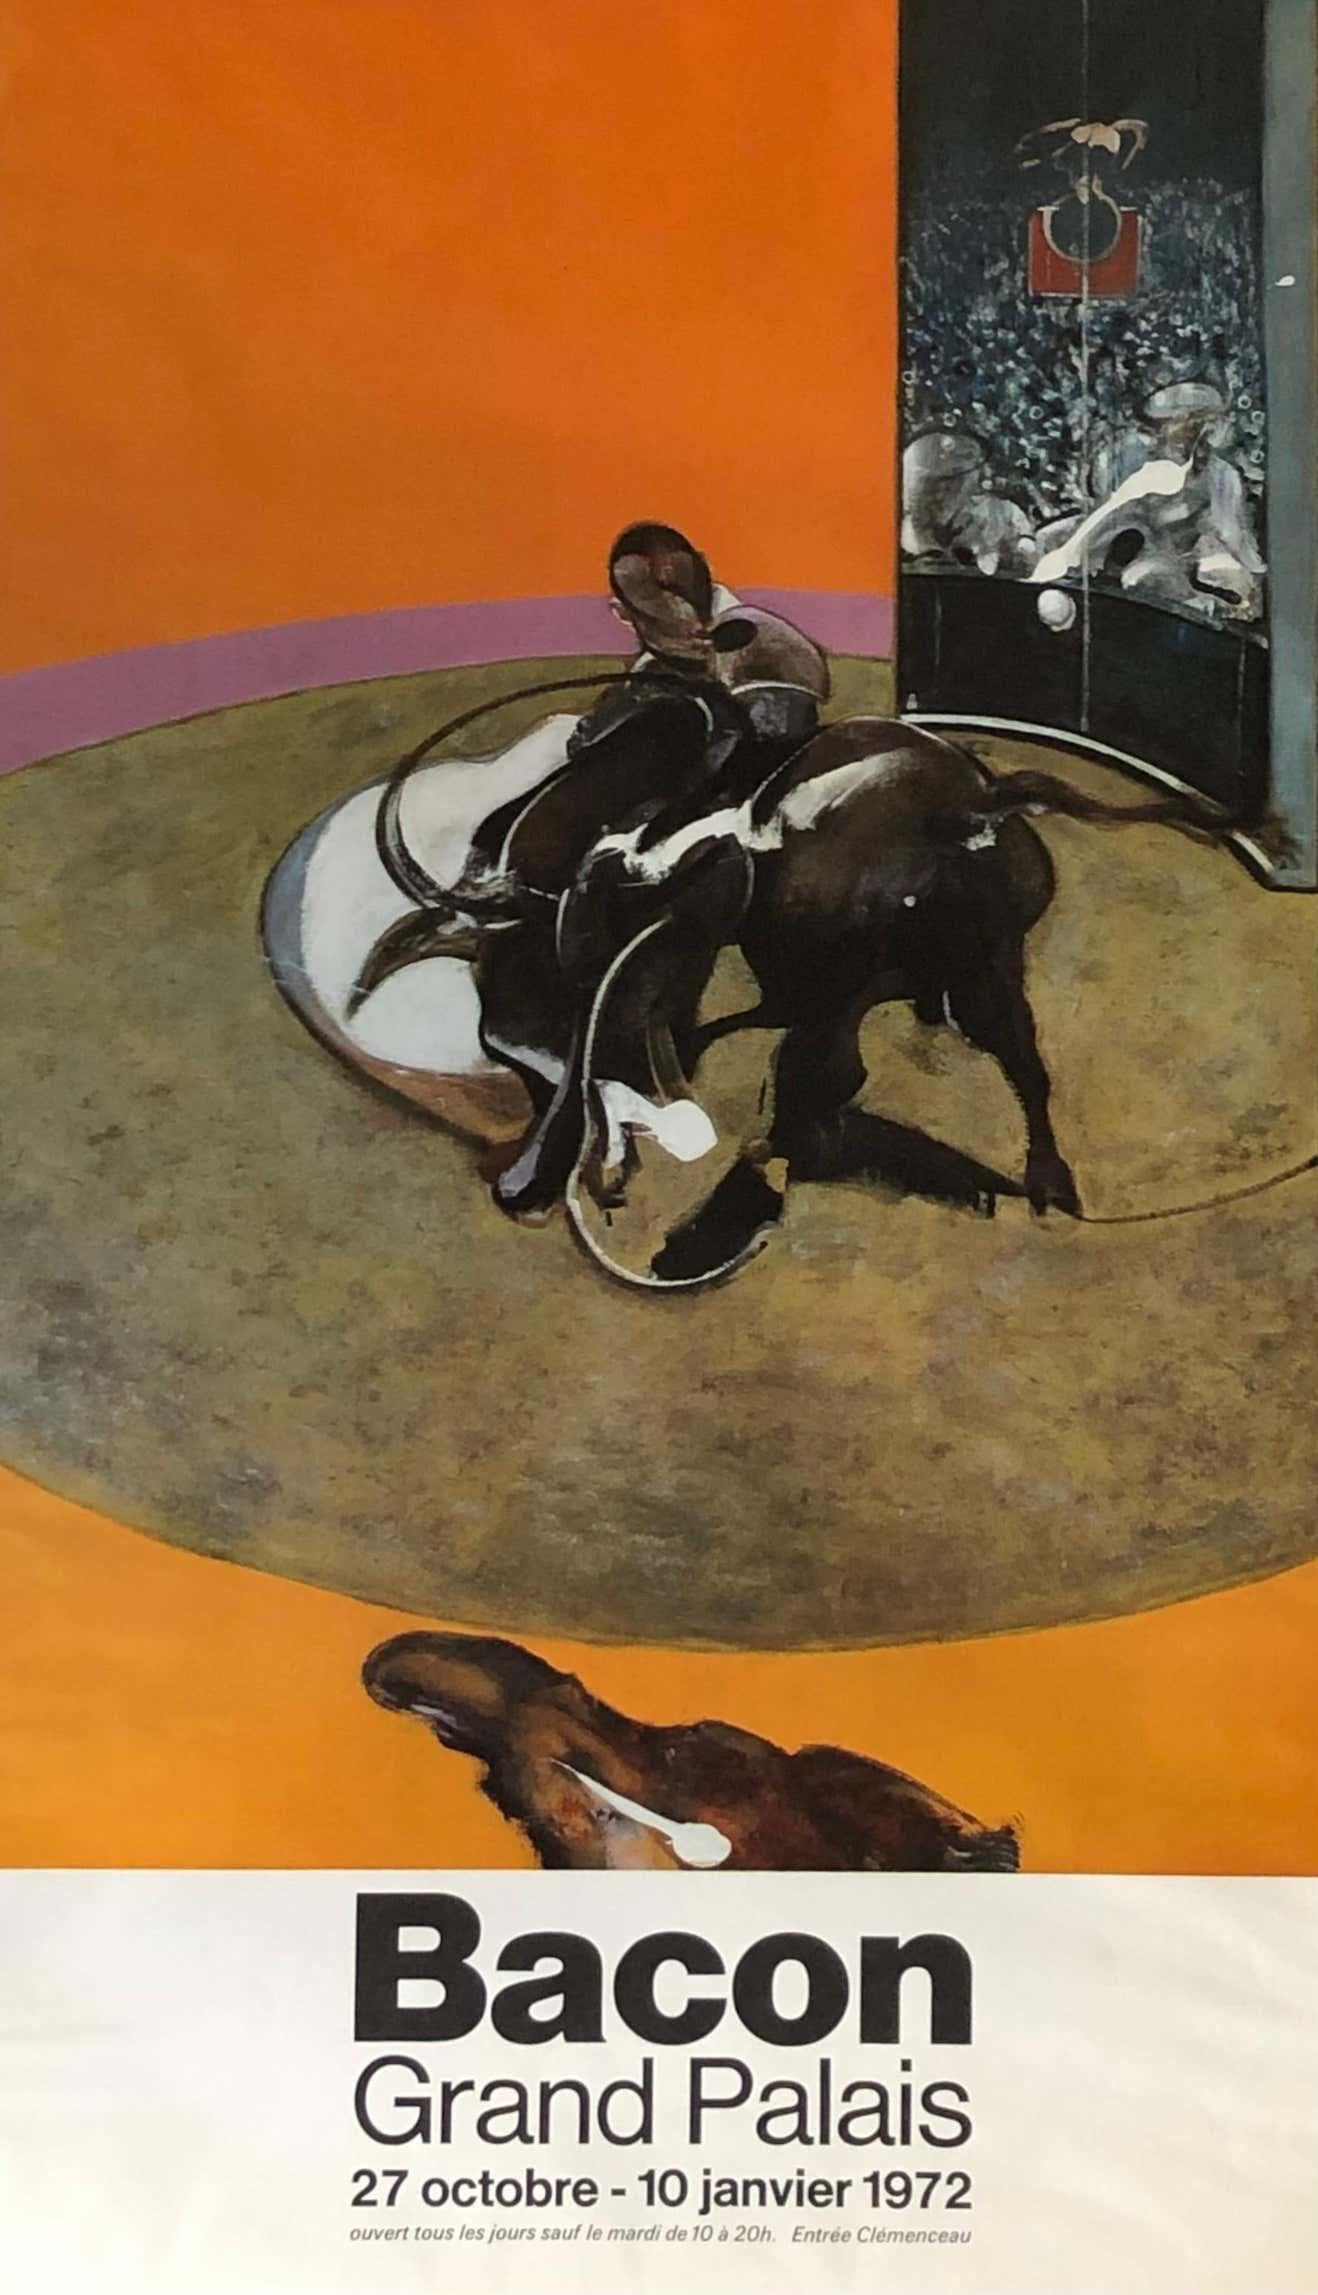 Francis Bacon Grand Palais, 1972:
Vintage 1970s Francis Bacon exhibition poster published on the occasion of: Francis Bacon at the Grand Palais (October 27- January 10 1972).

Offset lithograph.
Dimensions: 28.25 x 19 inches
Minor signs of handling;